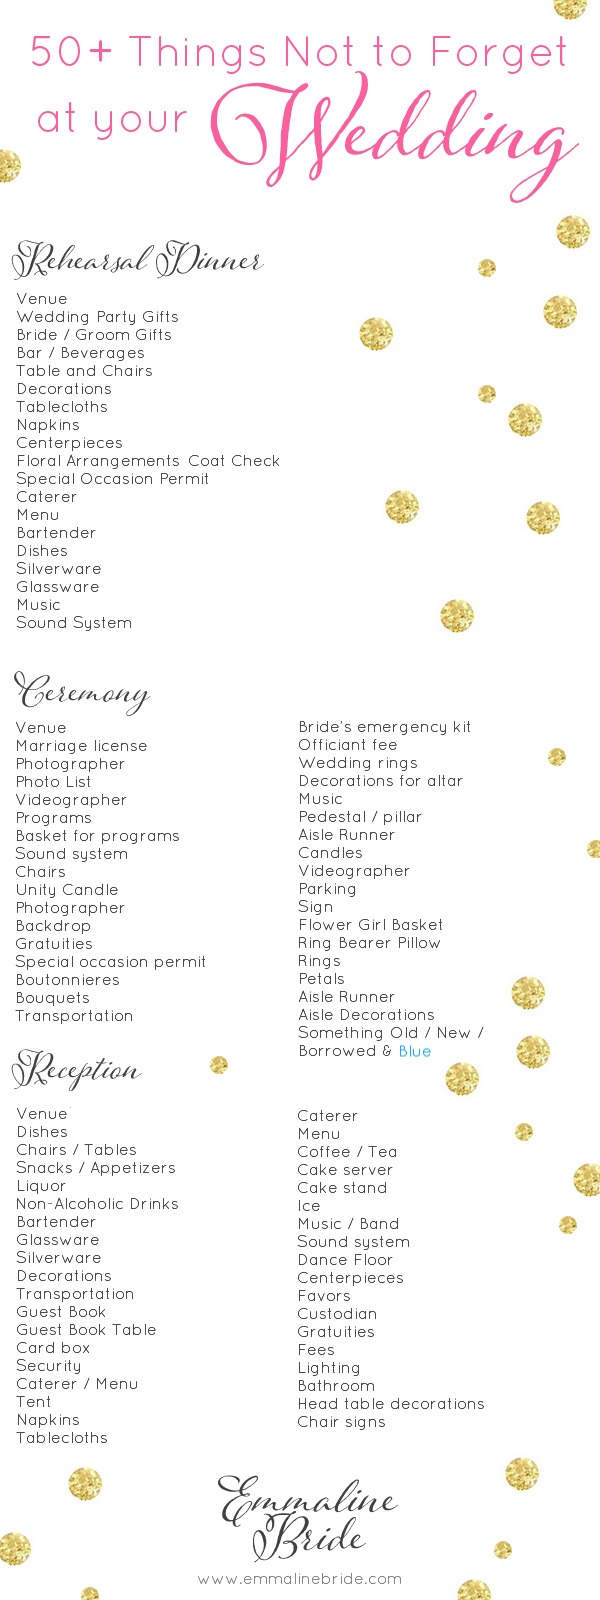 wedding checklist - things not to forget at your wedding - Wedding Day Checklist Printable